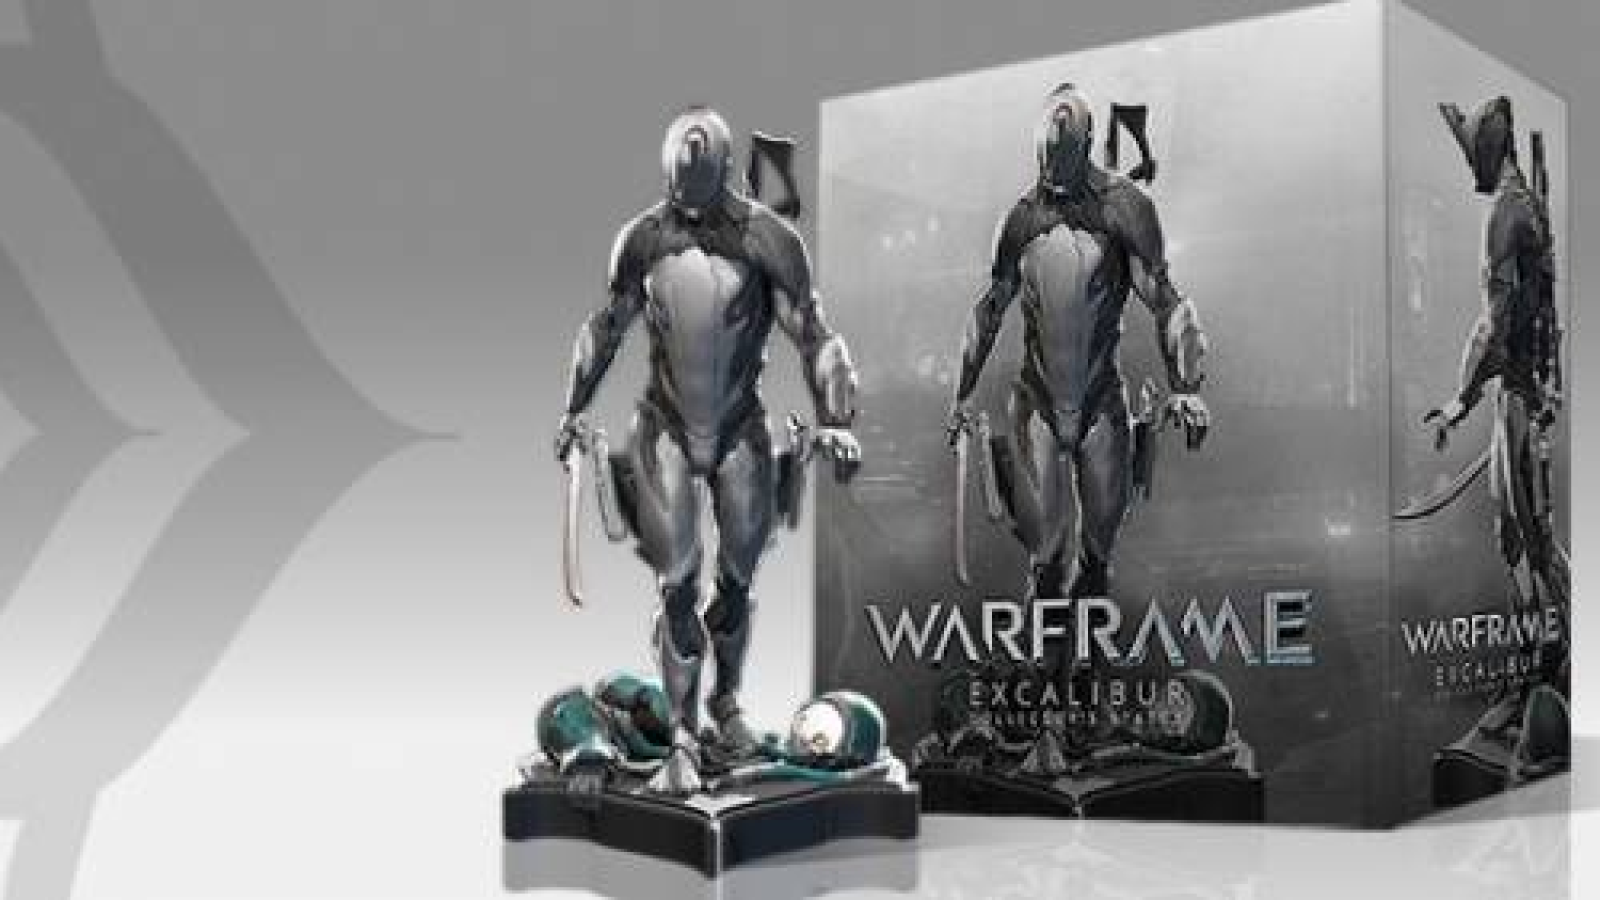 NEW COLLECTOR’S STATUE COMING